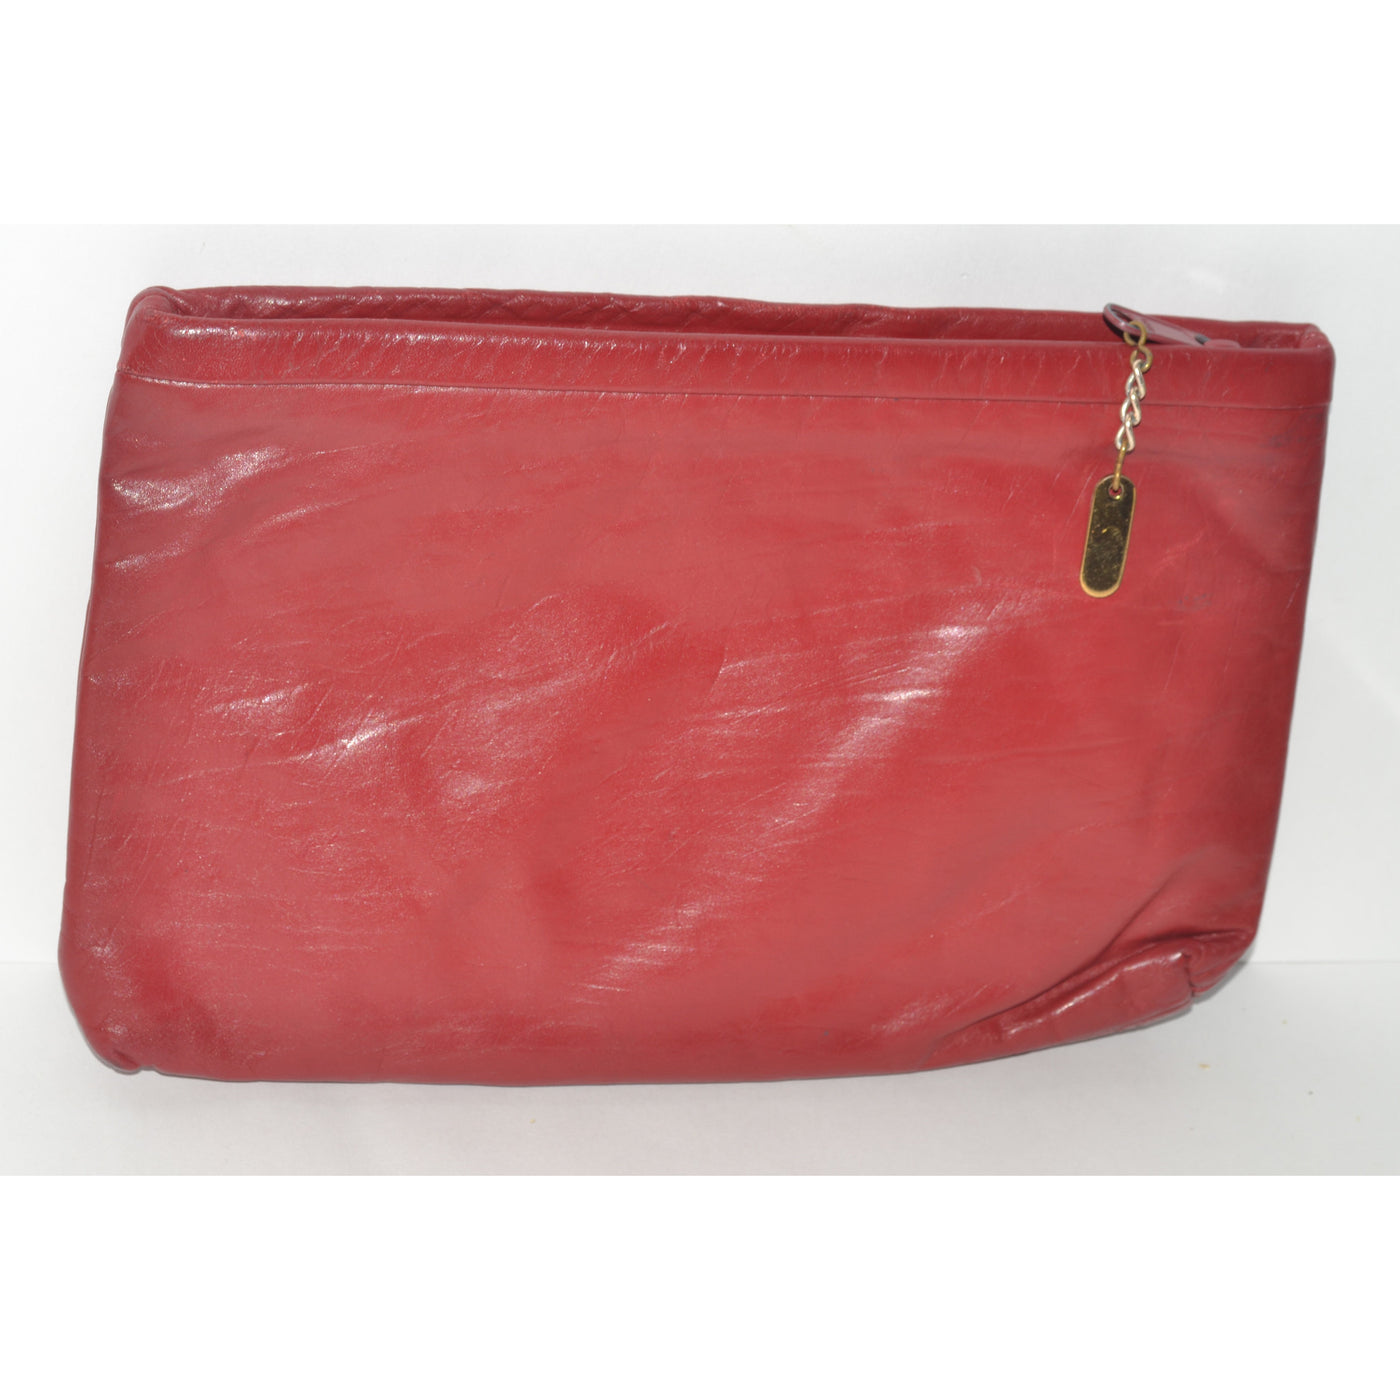 Vintage Deep Red Leather Clutch Purse